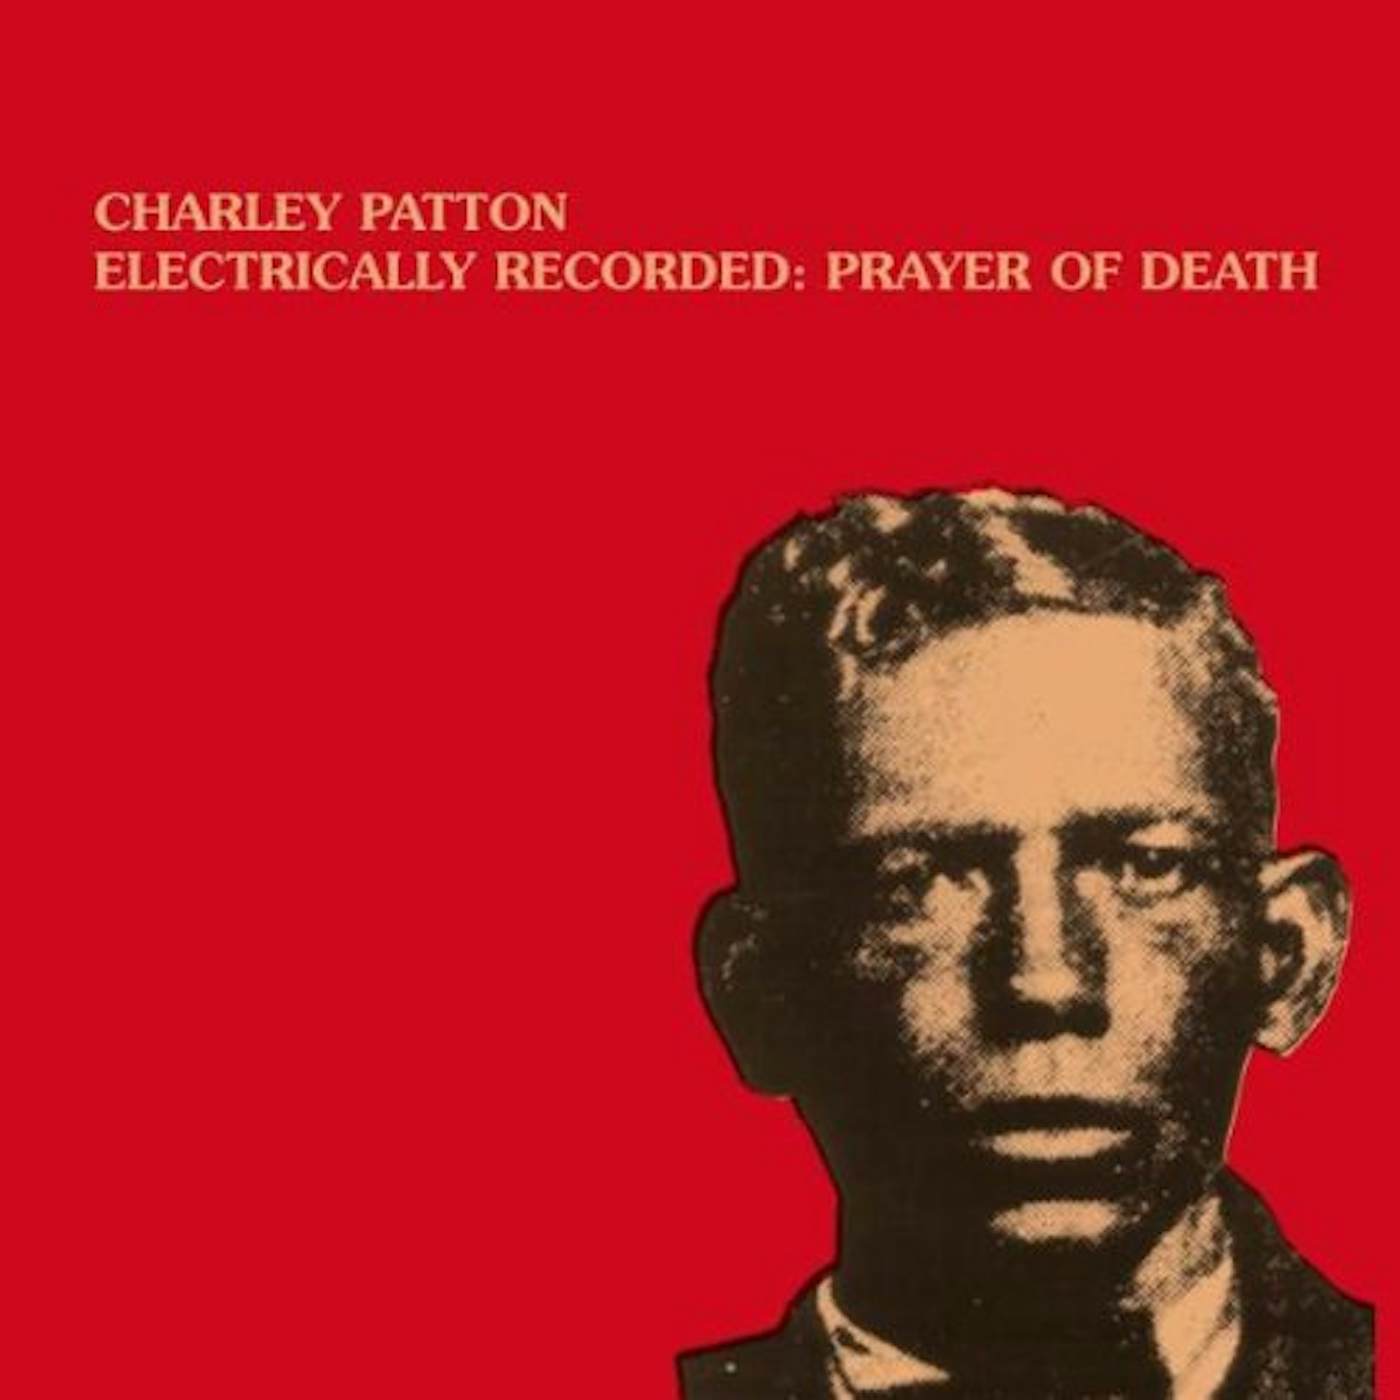 Charley Patton ELECTRICALLY RECORDED: PRAYER OF DEATH Vinyl Record